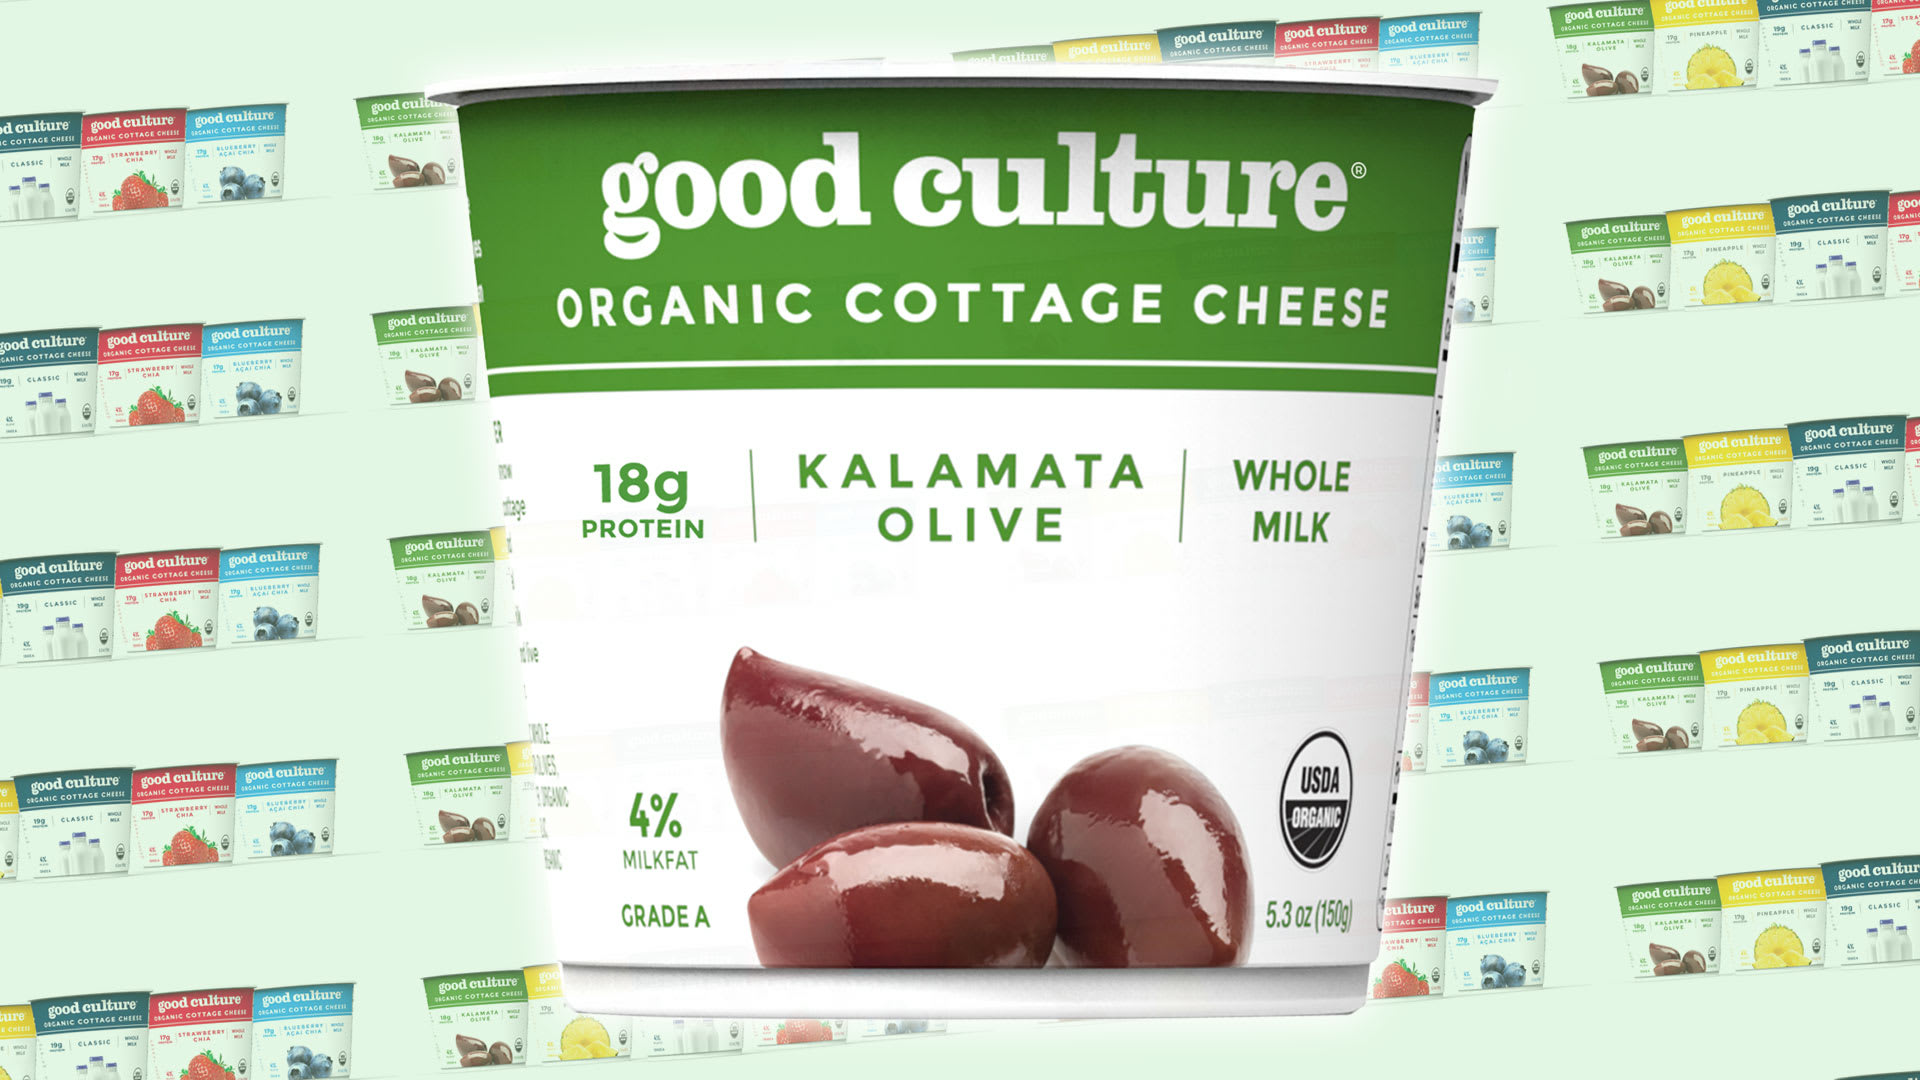 Can Cottage Cheese Become The Next Greek Yogurt?